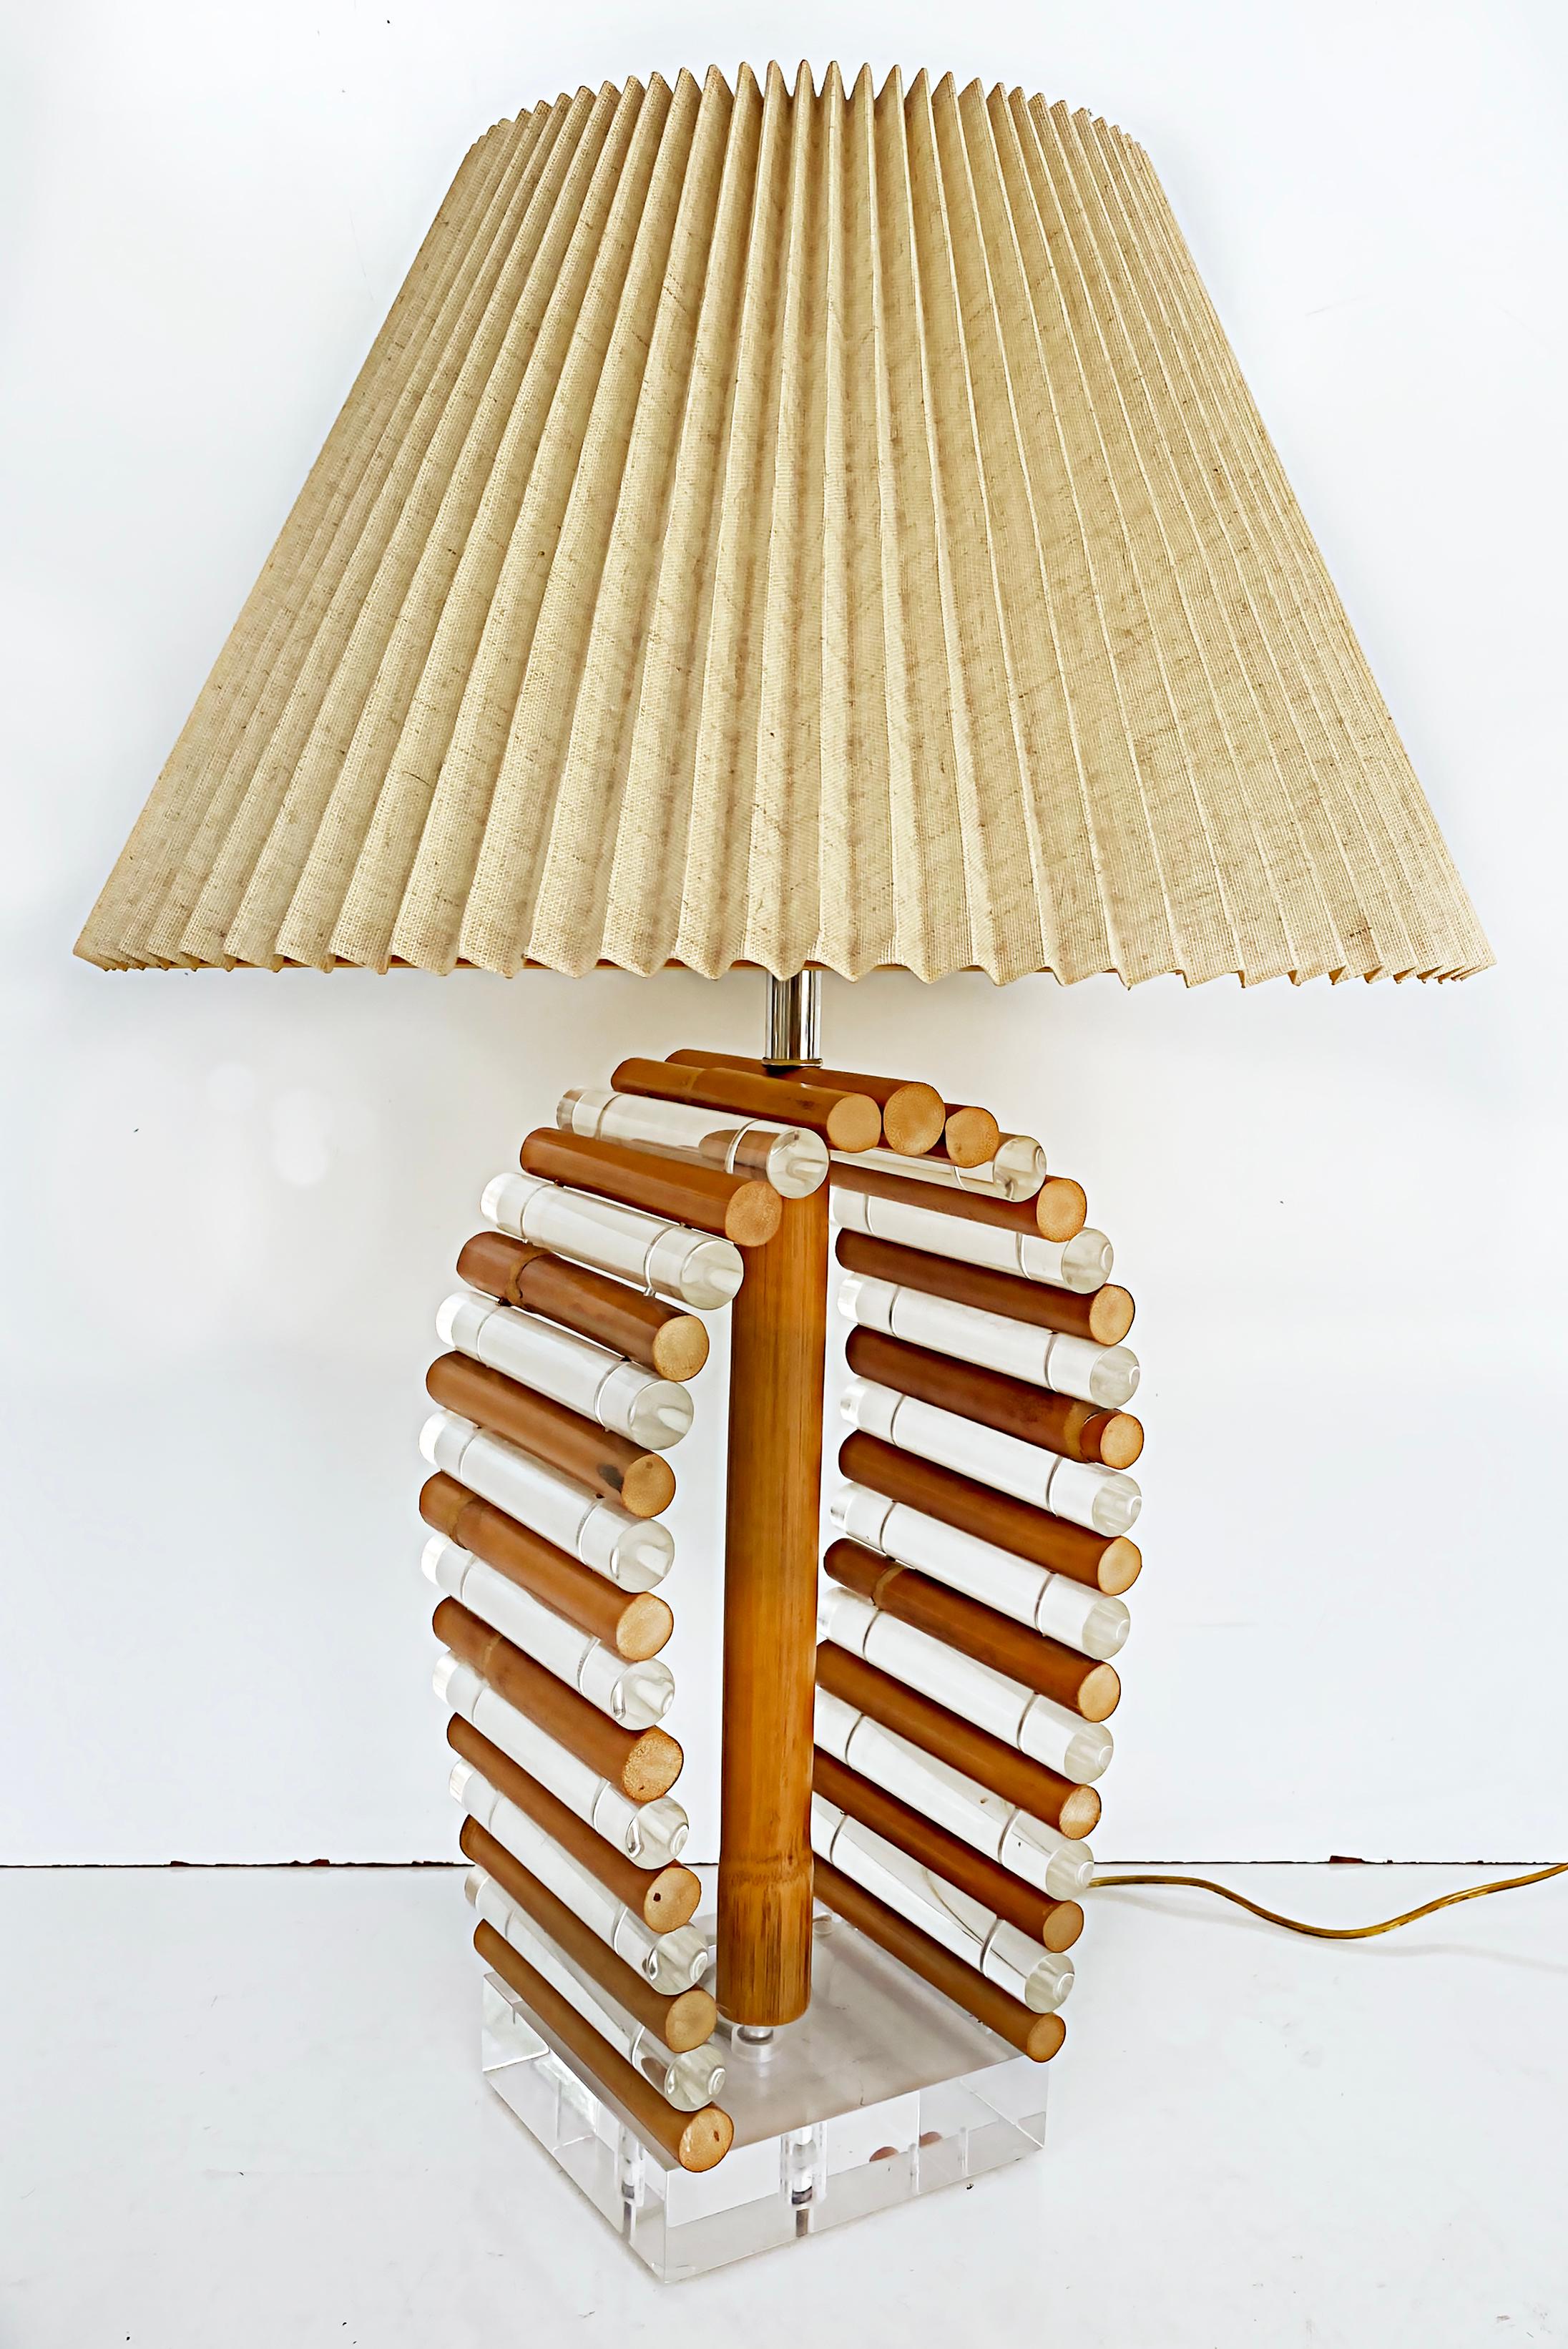 Mid-Century Modern Rattan Lucite table lamp with original finial

Offered for sale is a Mid-Century Modern rattan and Lucite table lamp with the original Lucite finial. The original wiring is in good working condition. This lamp has a single socket